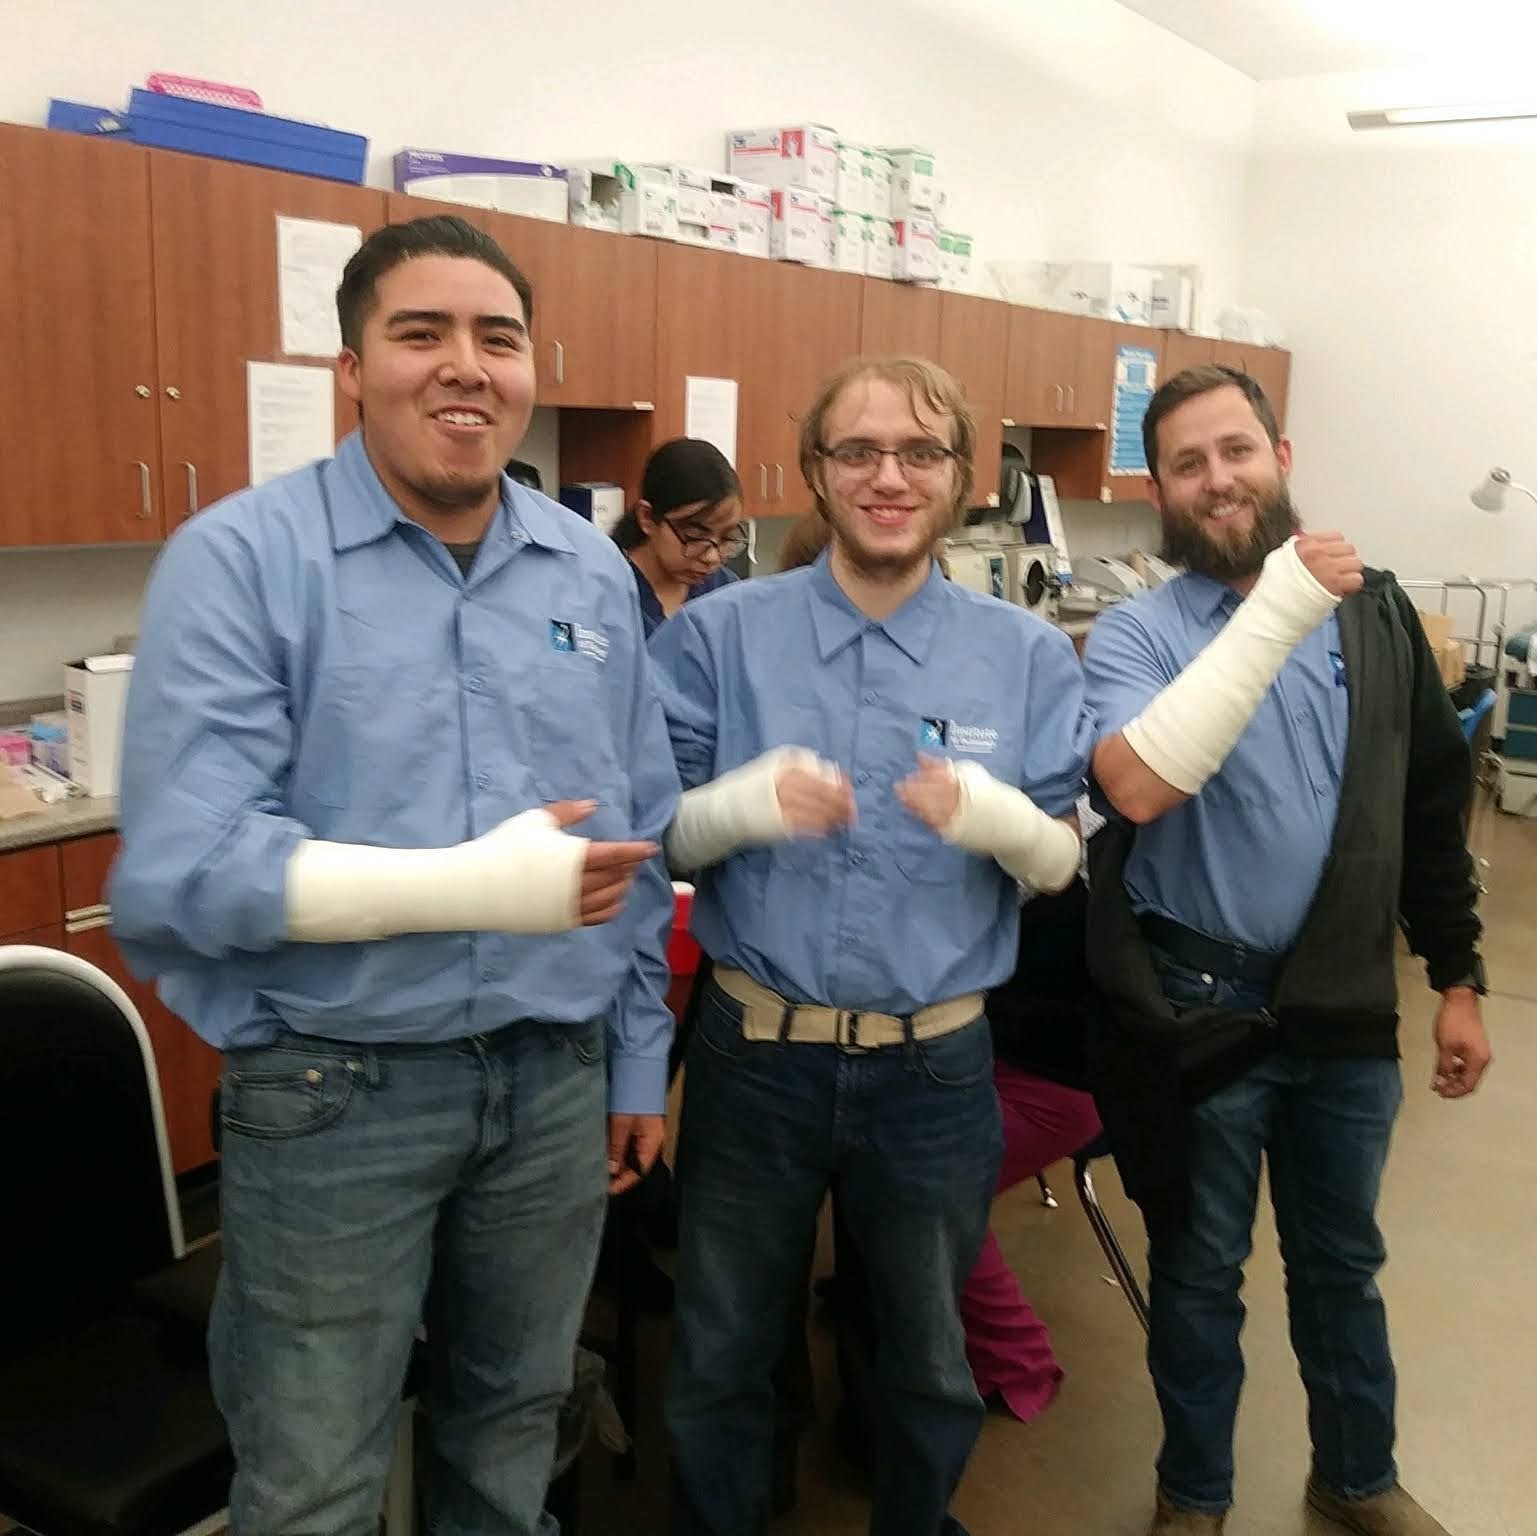 Students showing off practice casts